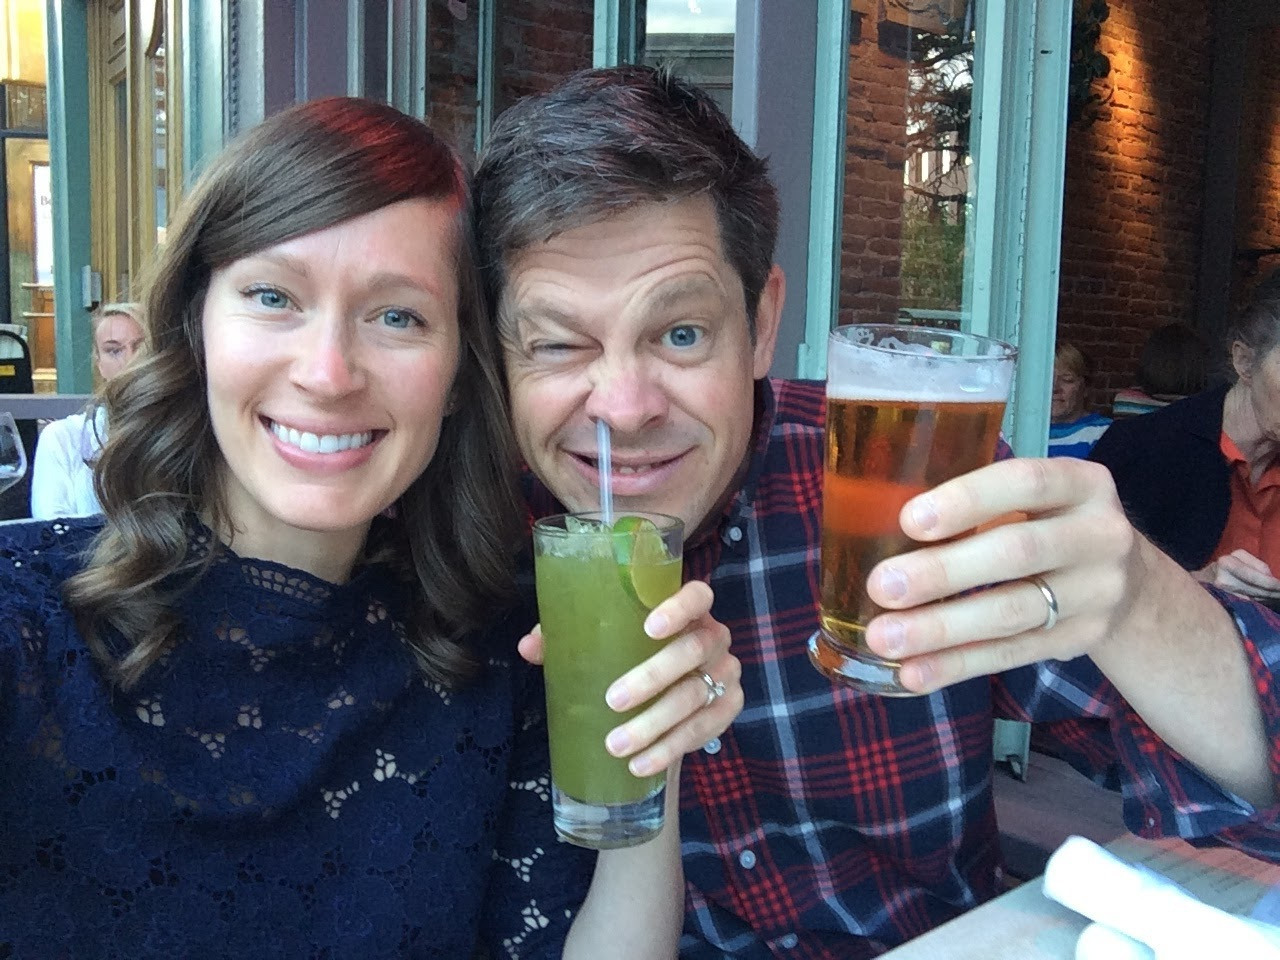 Two people holding drinks and smiling at the camera.